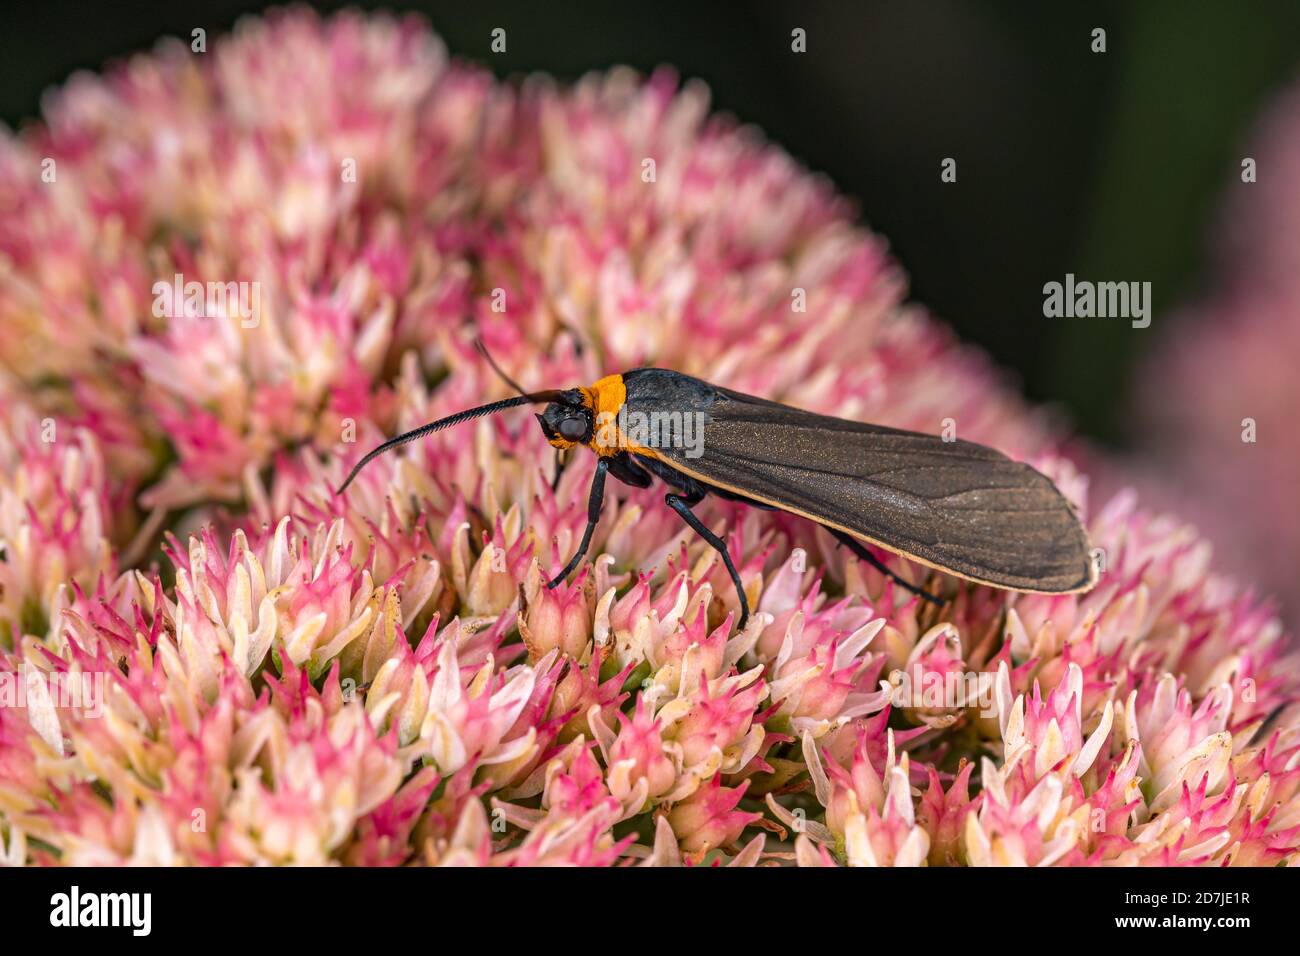 Closeup of Yellow-collared Scape Moth feeding on nectar from Sedum plant. Concept of insect and wildlife conservation, backyard gardening Stock Photo